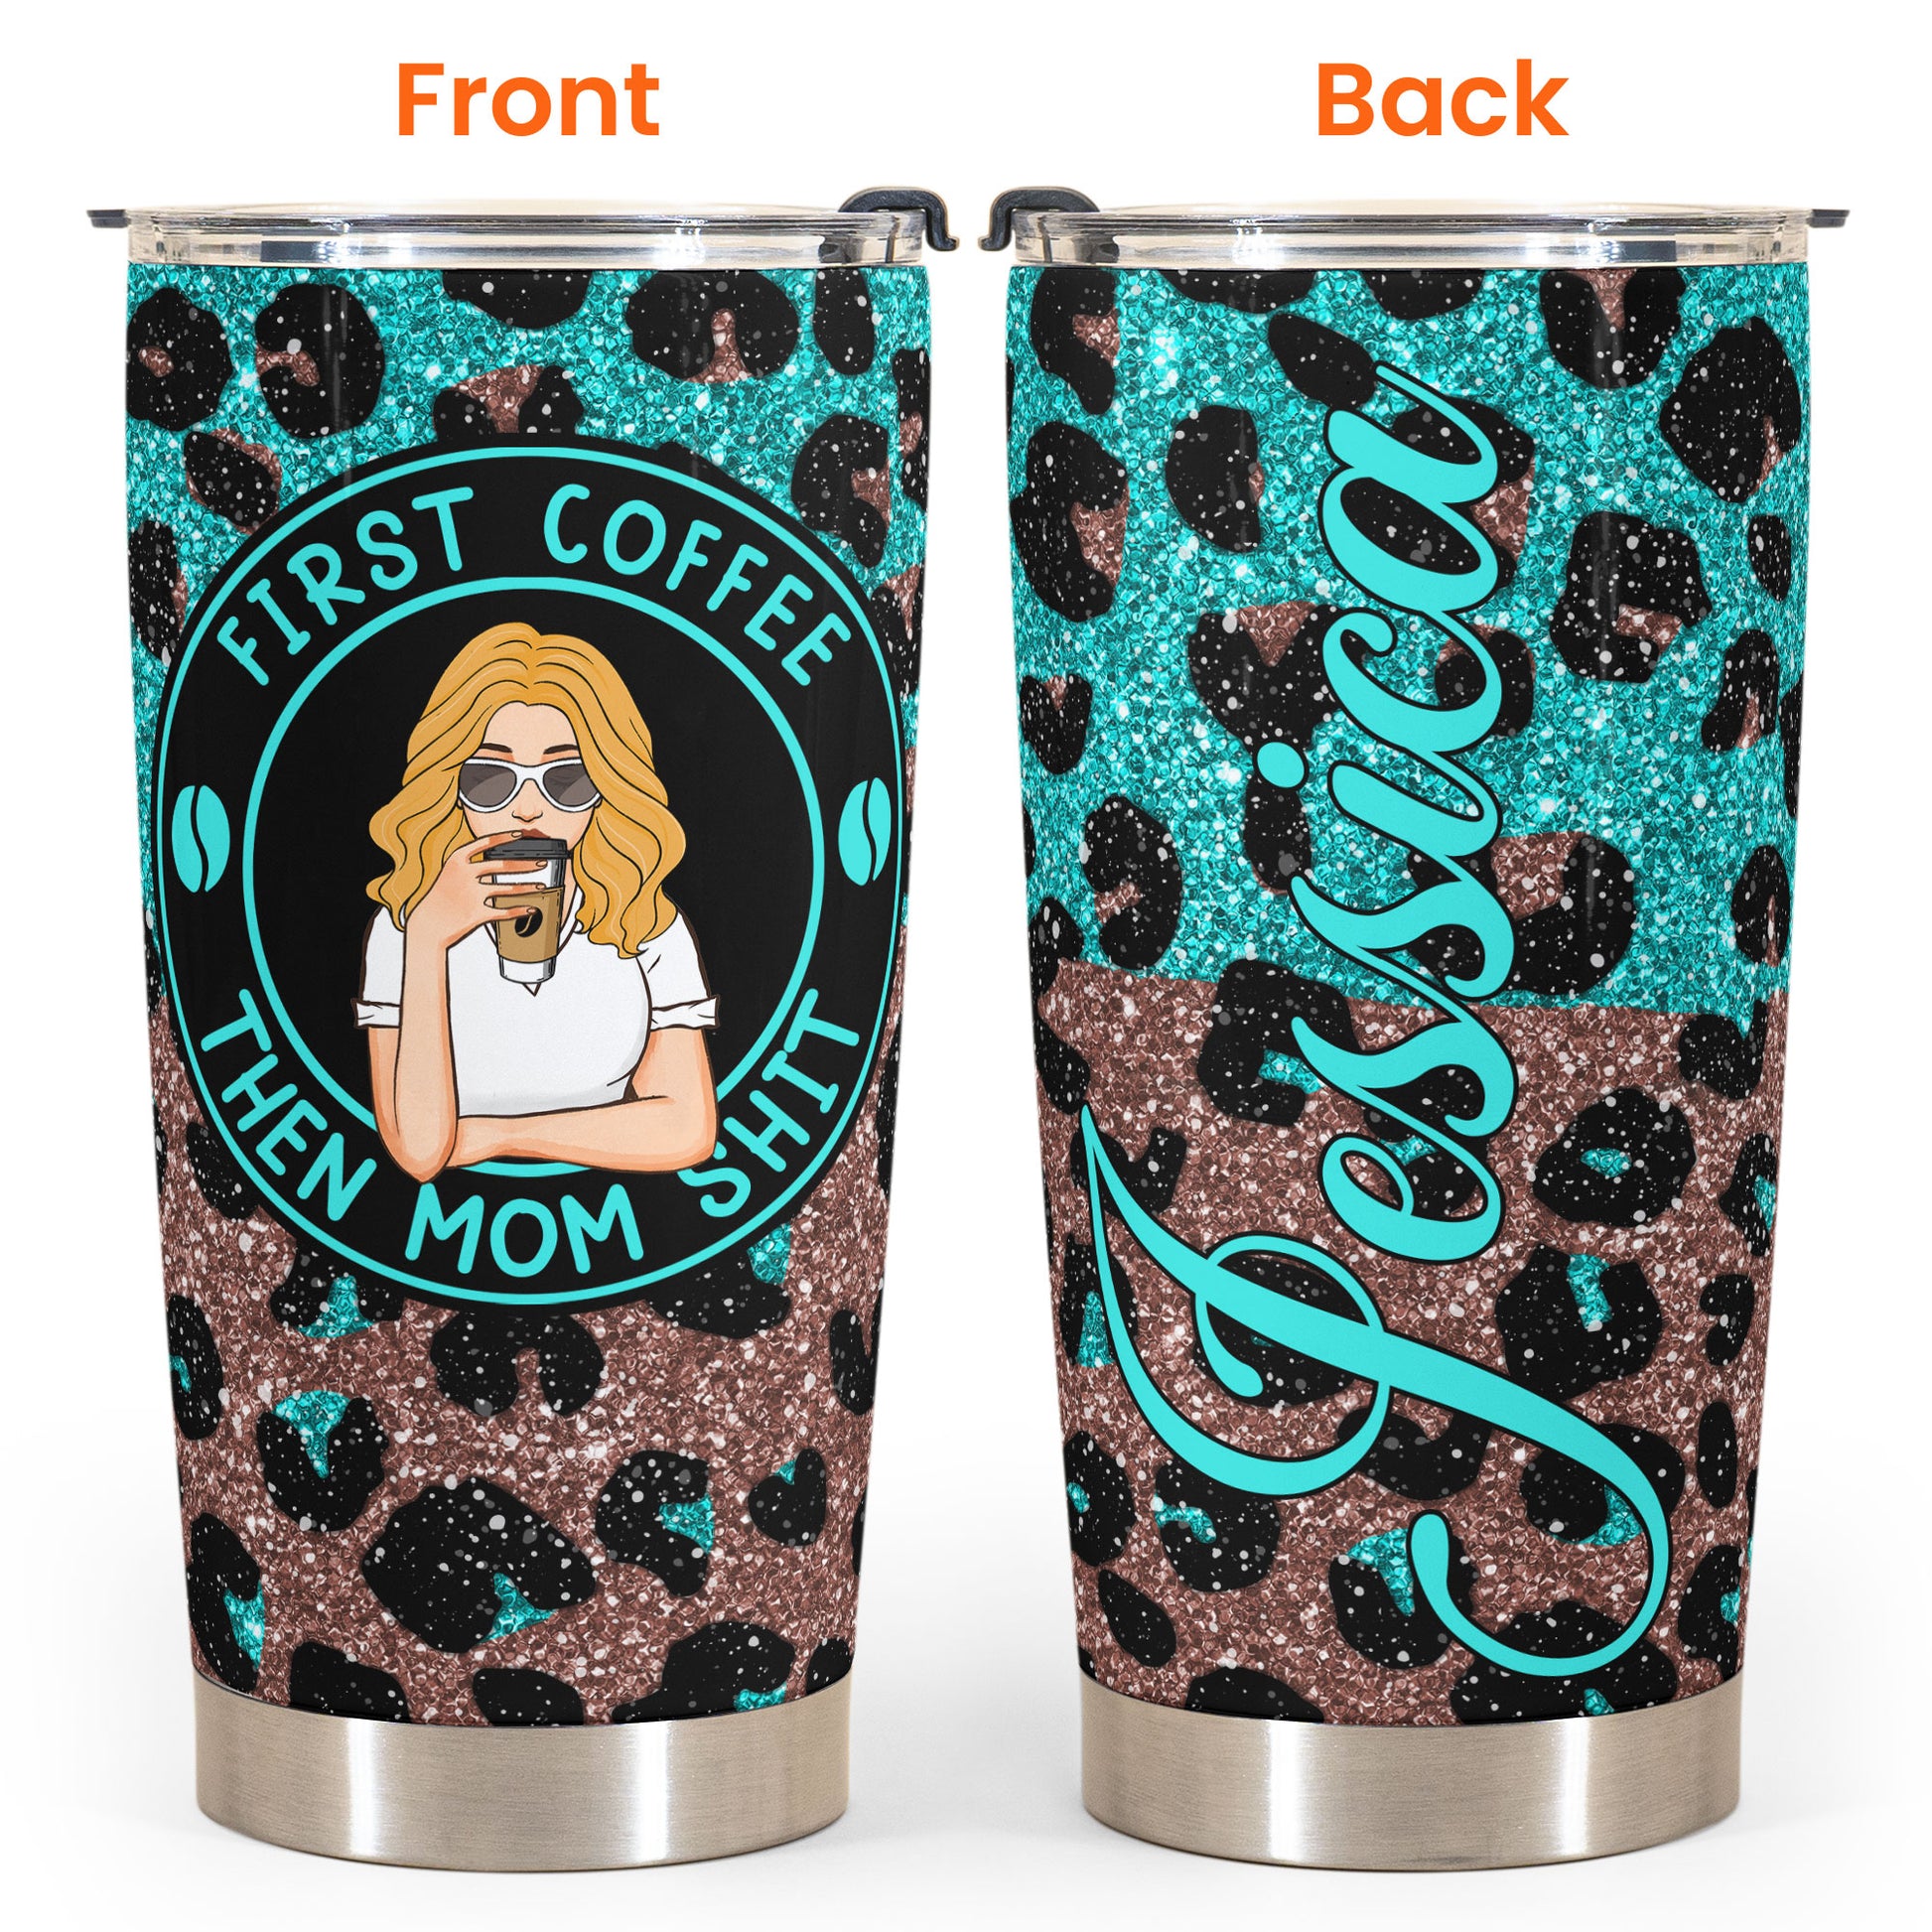 Mom's Birthday Gift from Daughter Son Stepson Personalized Thermos